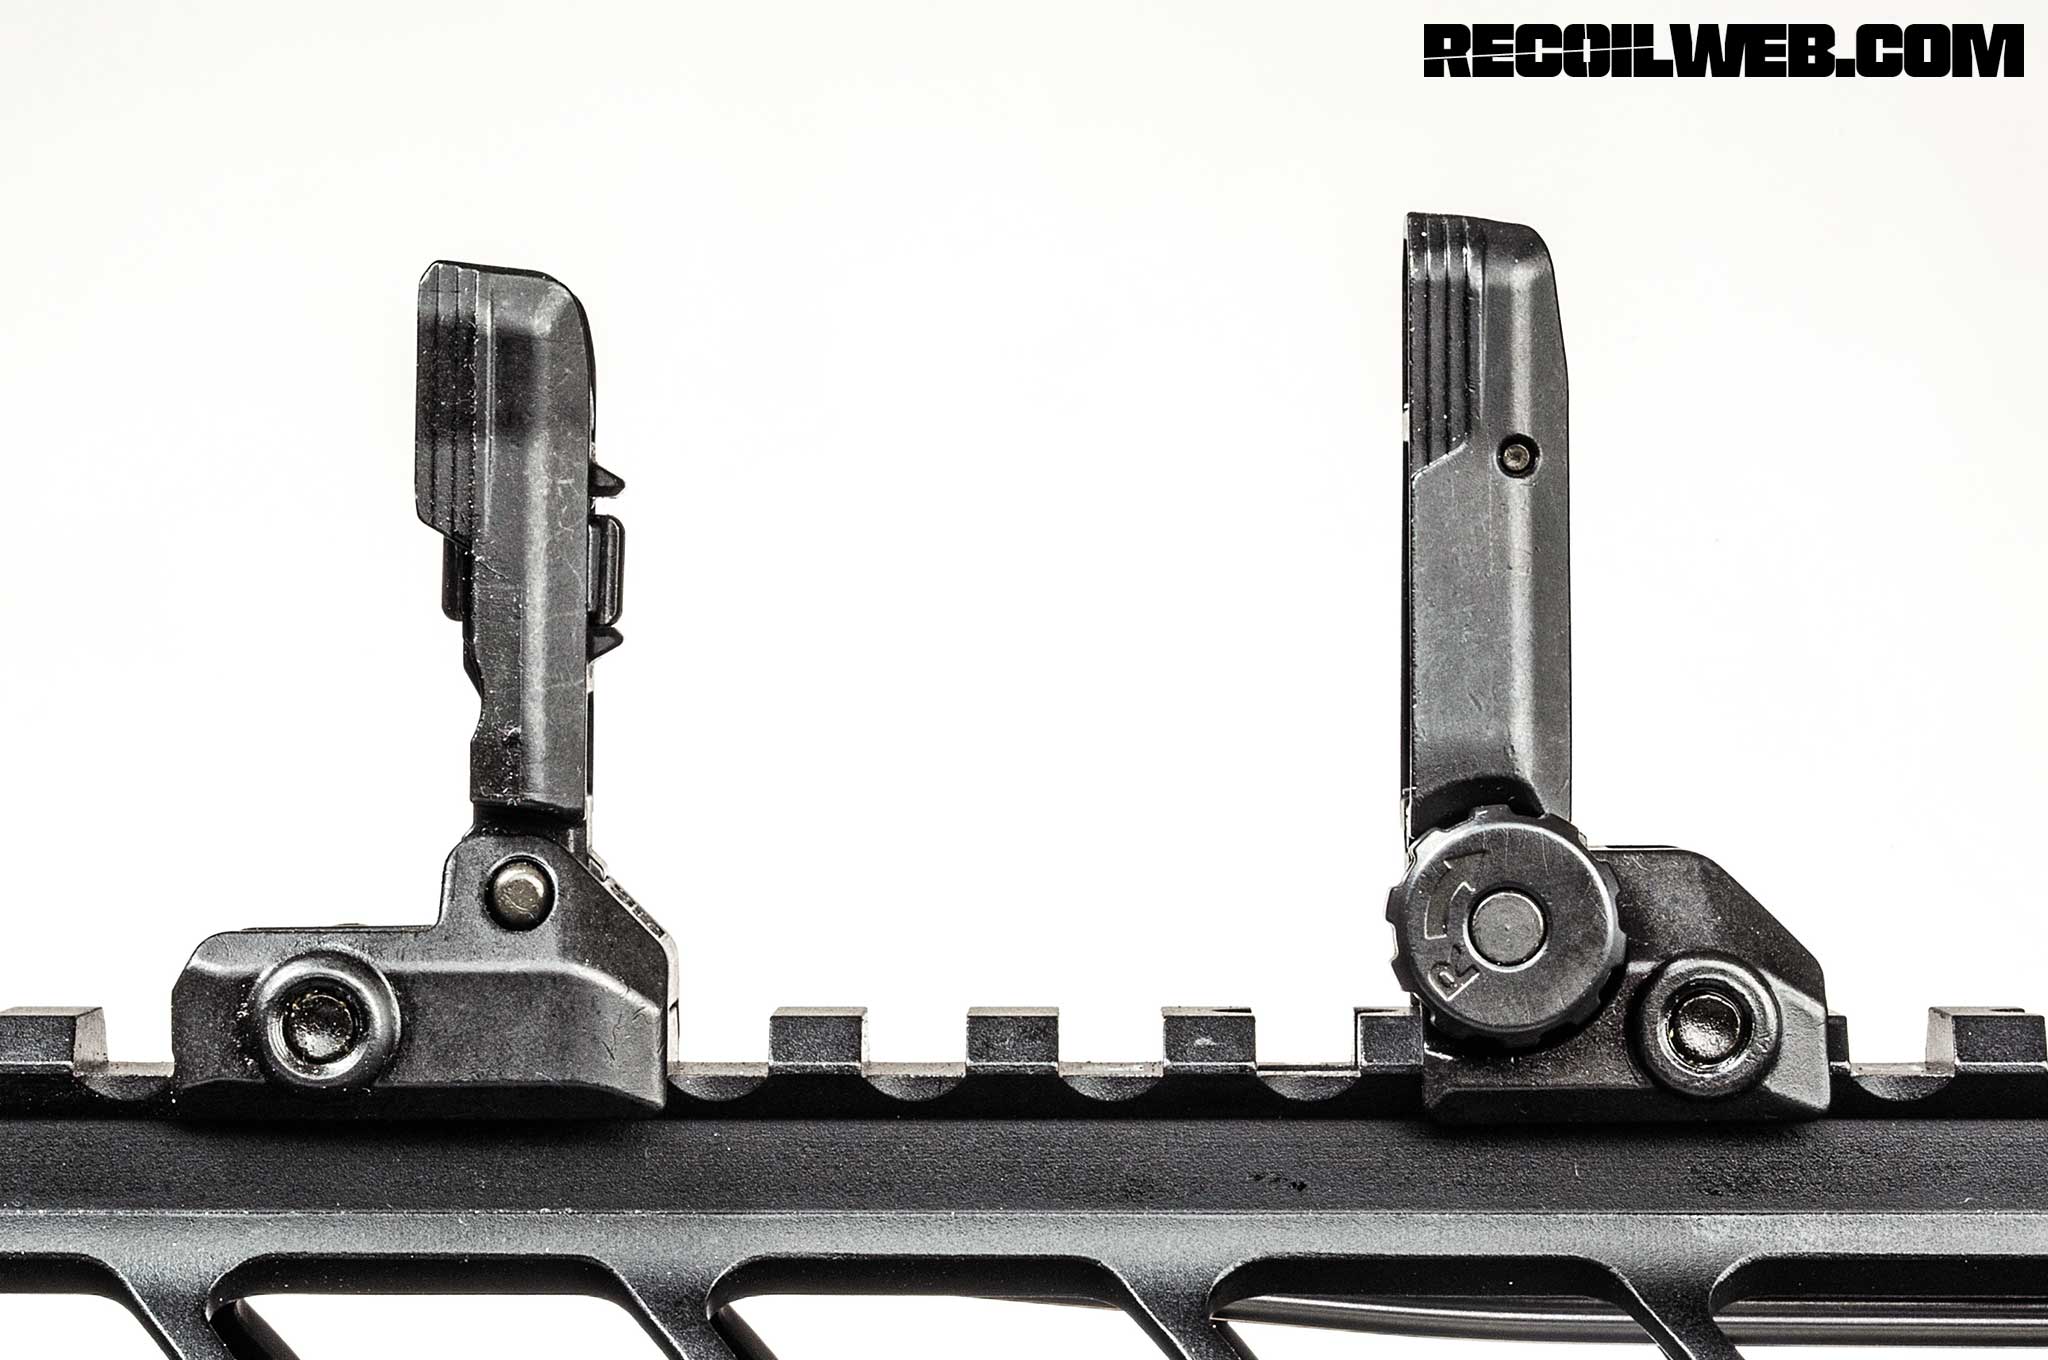 back-up-iron-sights-buyers-guide-magpul-mbus-pro-001.